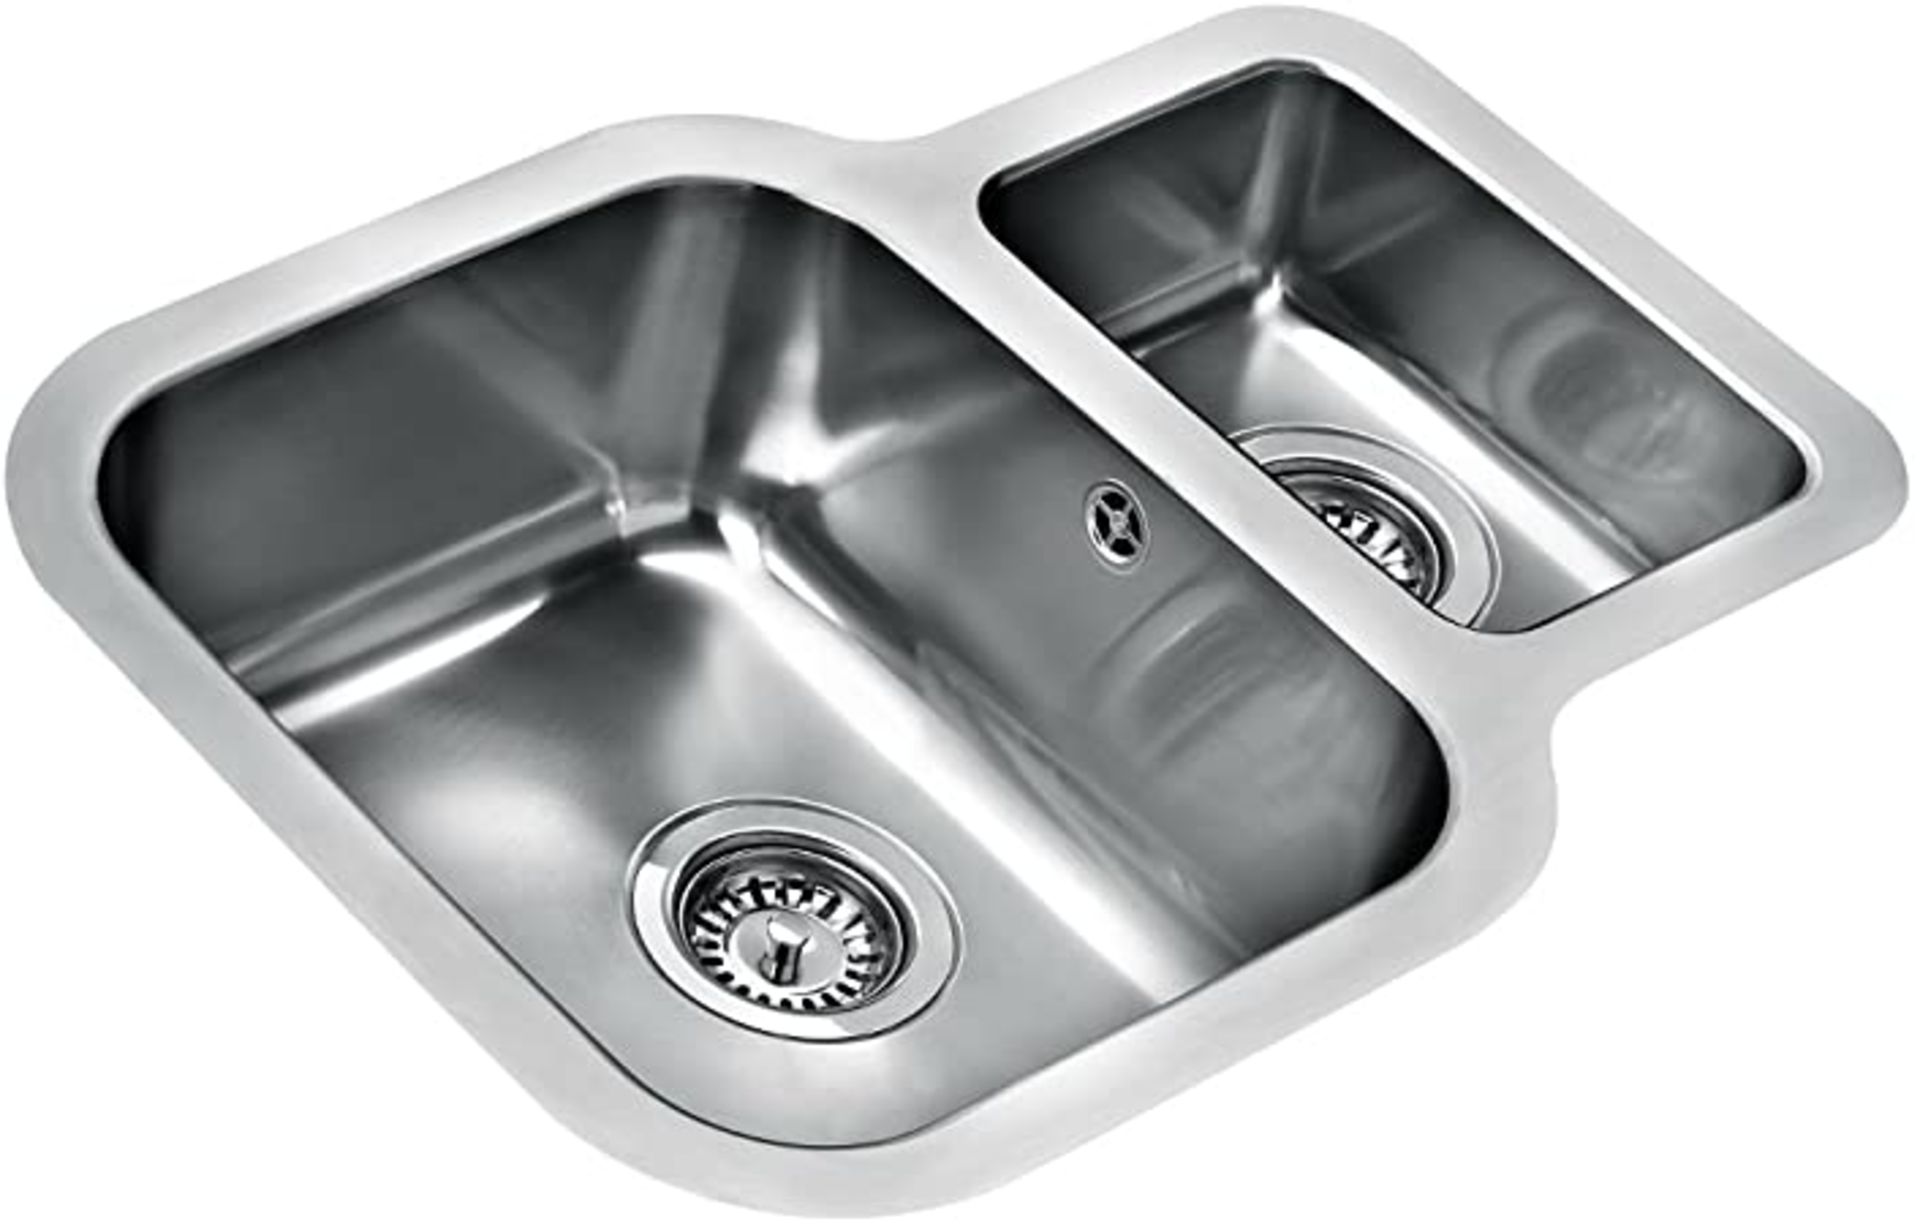 New (S41) Teka Stainless Steel Sink. Material: Stainless Steel 18/10, Aisi 304 Polished Embe... - Image 2 of 2